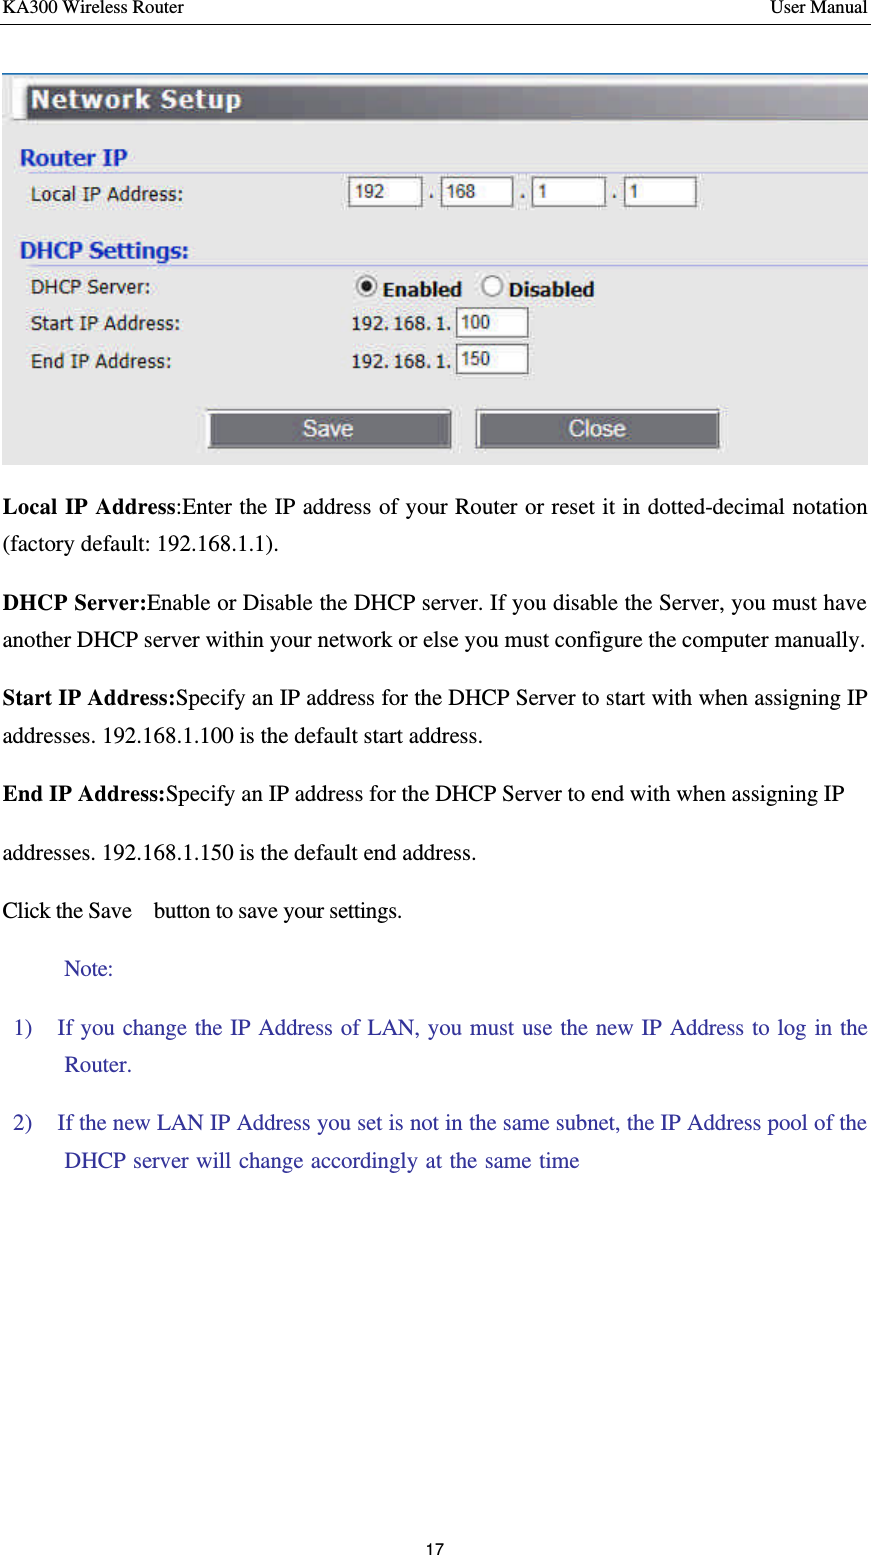 KA300 Wireless Router       User Manual 17   Local IP Address:Enter the IP address of your Router or reset it in dotted-decimal notation (factory default: 192.168.1.1).   DHCP Server:Enable or Disable the DHCP server. If you disable the Server, you must have another DHCP server within your network or else you must configure the computer manually.   Start IP Address:Specify an IP address for the DHCP Server to start with when assigning IP addresses. 192.168.1.100 is the default start address.   End IP Address:Specify an IP address for the DHCP Server to end with when assigning IP   addresses. 192.168.1.150 is the default end address.     Click the Save   button to save your settings.  Note:   1)  If you change the IP Address of LAN, you must use the new IP Address to log in the Router.   2)  If the new LAN IP Address you set is not in the same subnet, the IP Address pool of the DHCP server will change accordingly at the same time，while the Virtual Server and DMZ Host will not take effect until they are re-configured.      